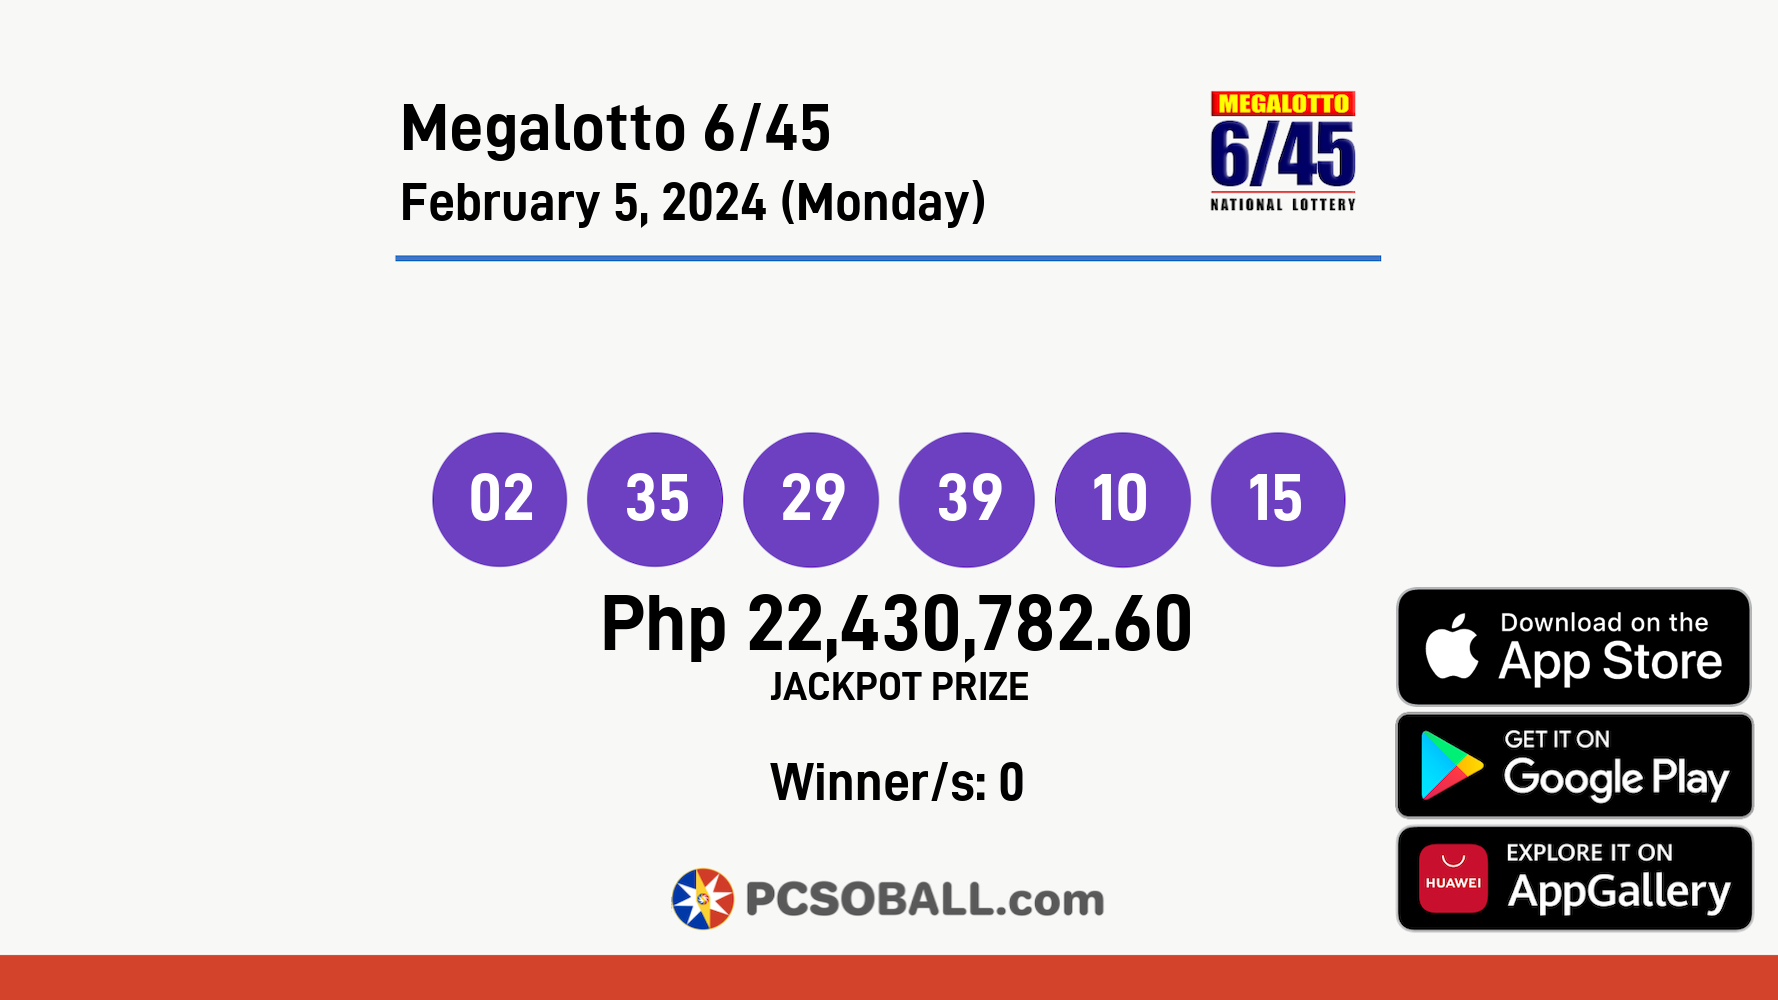 Megalotto 6/45 February 5, 2024 (Monday) Result